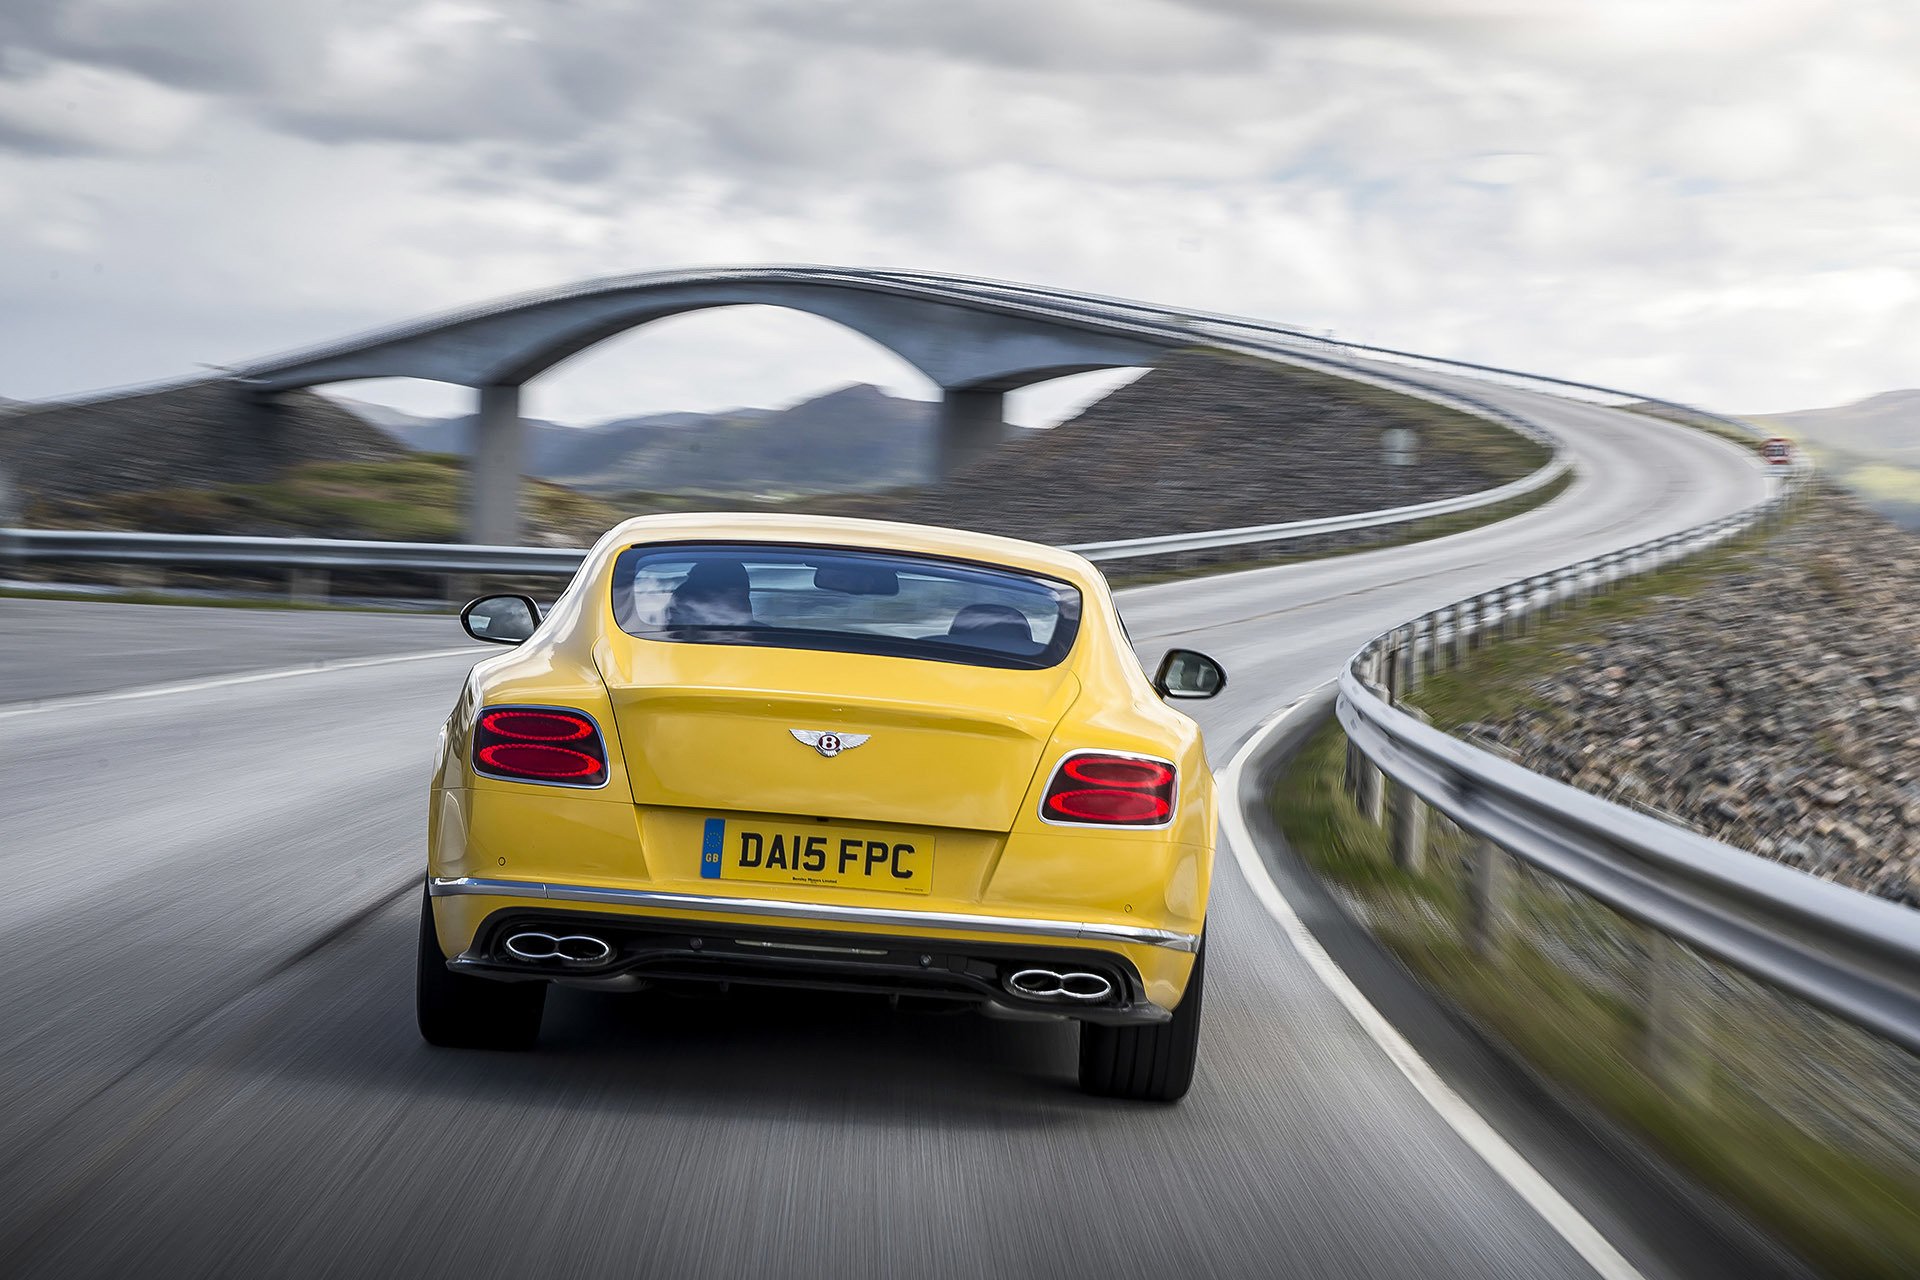 2016, Bentley, Continental gt, Coupe, Cars, Yellow Wallpaper